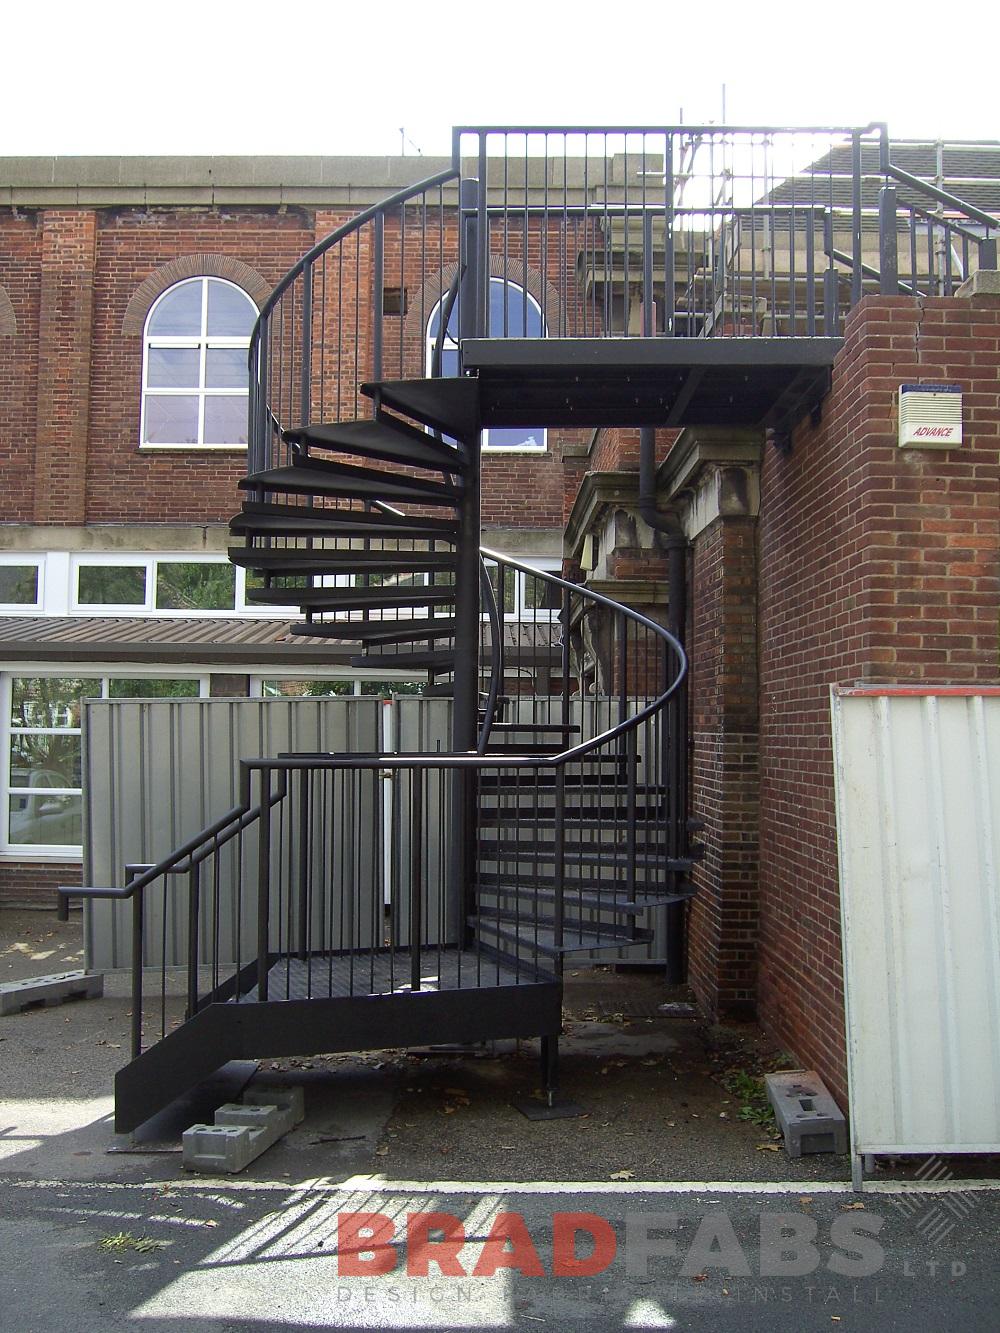 Spiral staircase installed in leeds, external spiral staircase for commercial use, spiral staircase fabricated in bradford by bradfabs